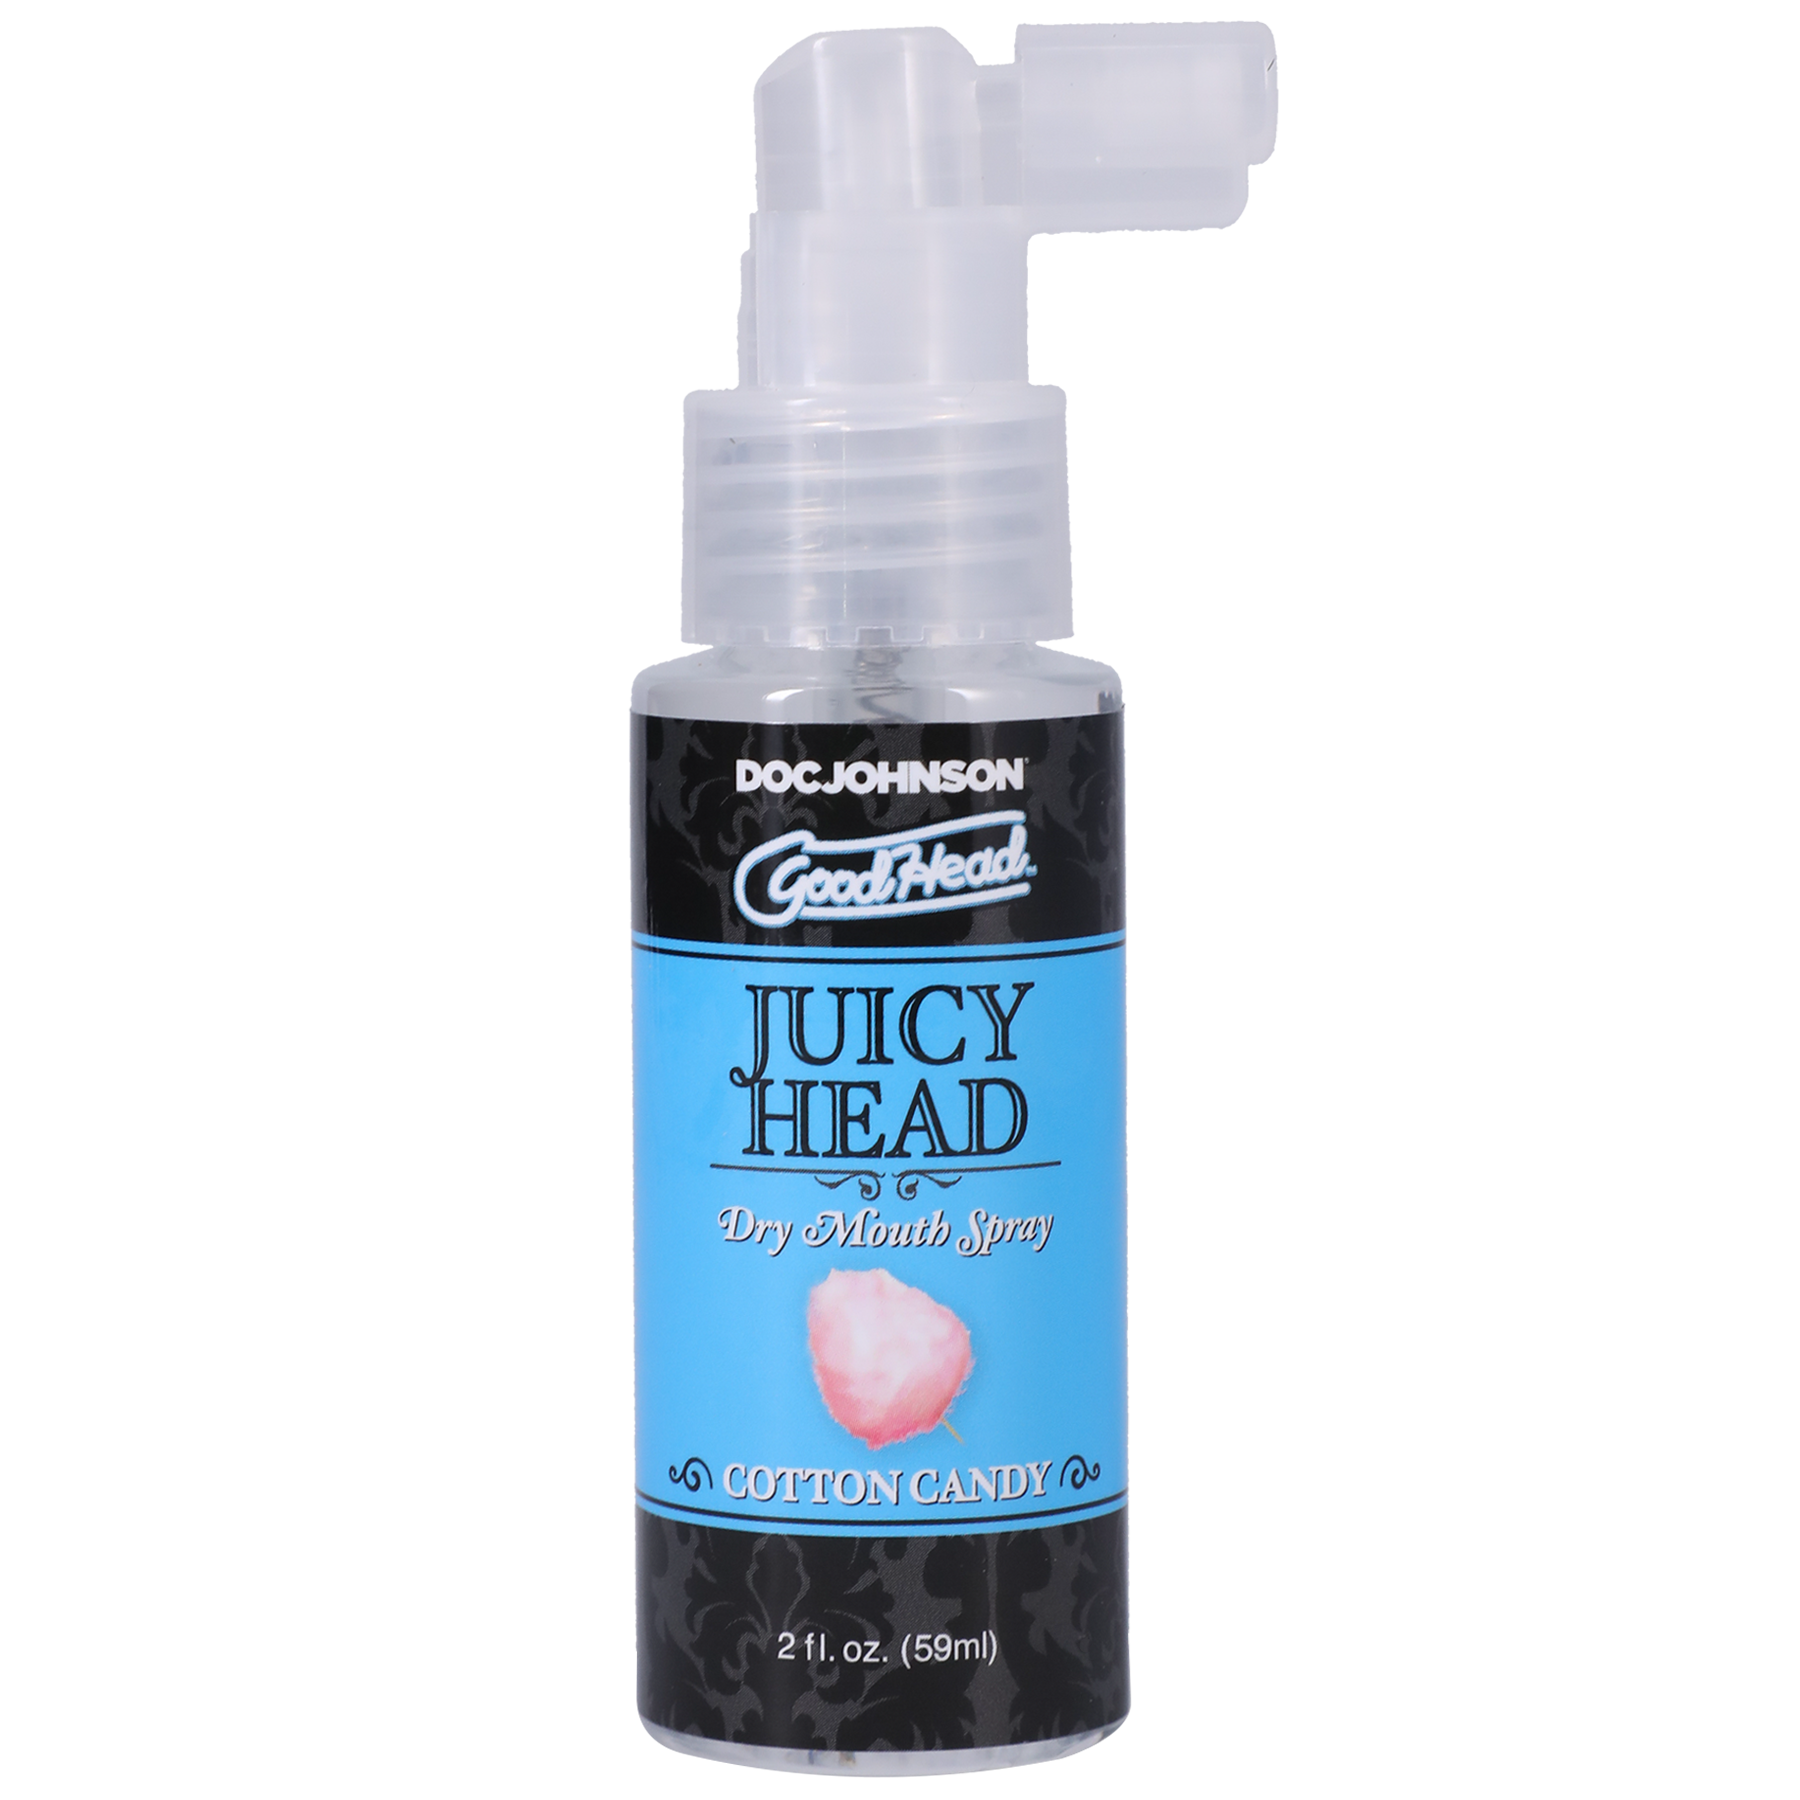 Photo of the bottle of GoodHead Juicy Head from Doc Johson (cotton candy) shows its easy to use pump spray nozzle.